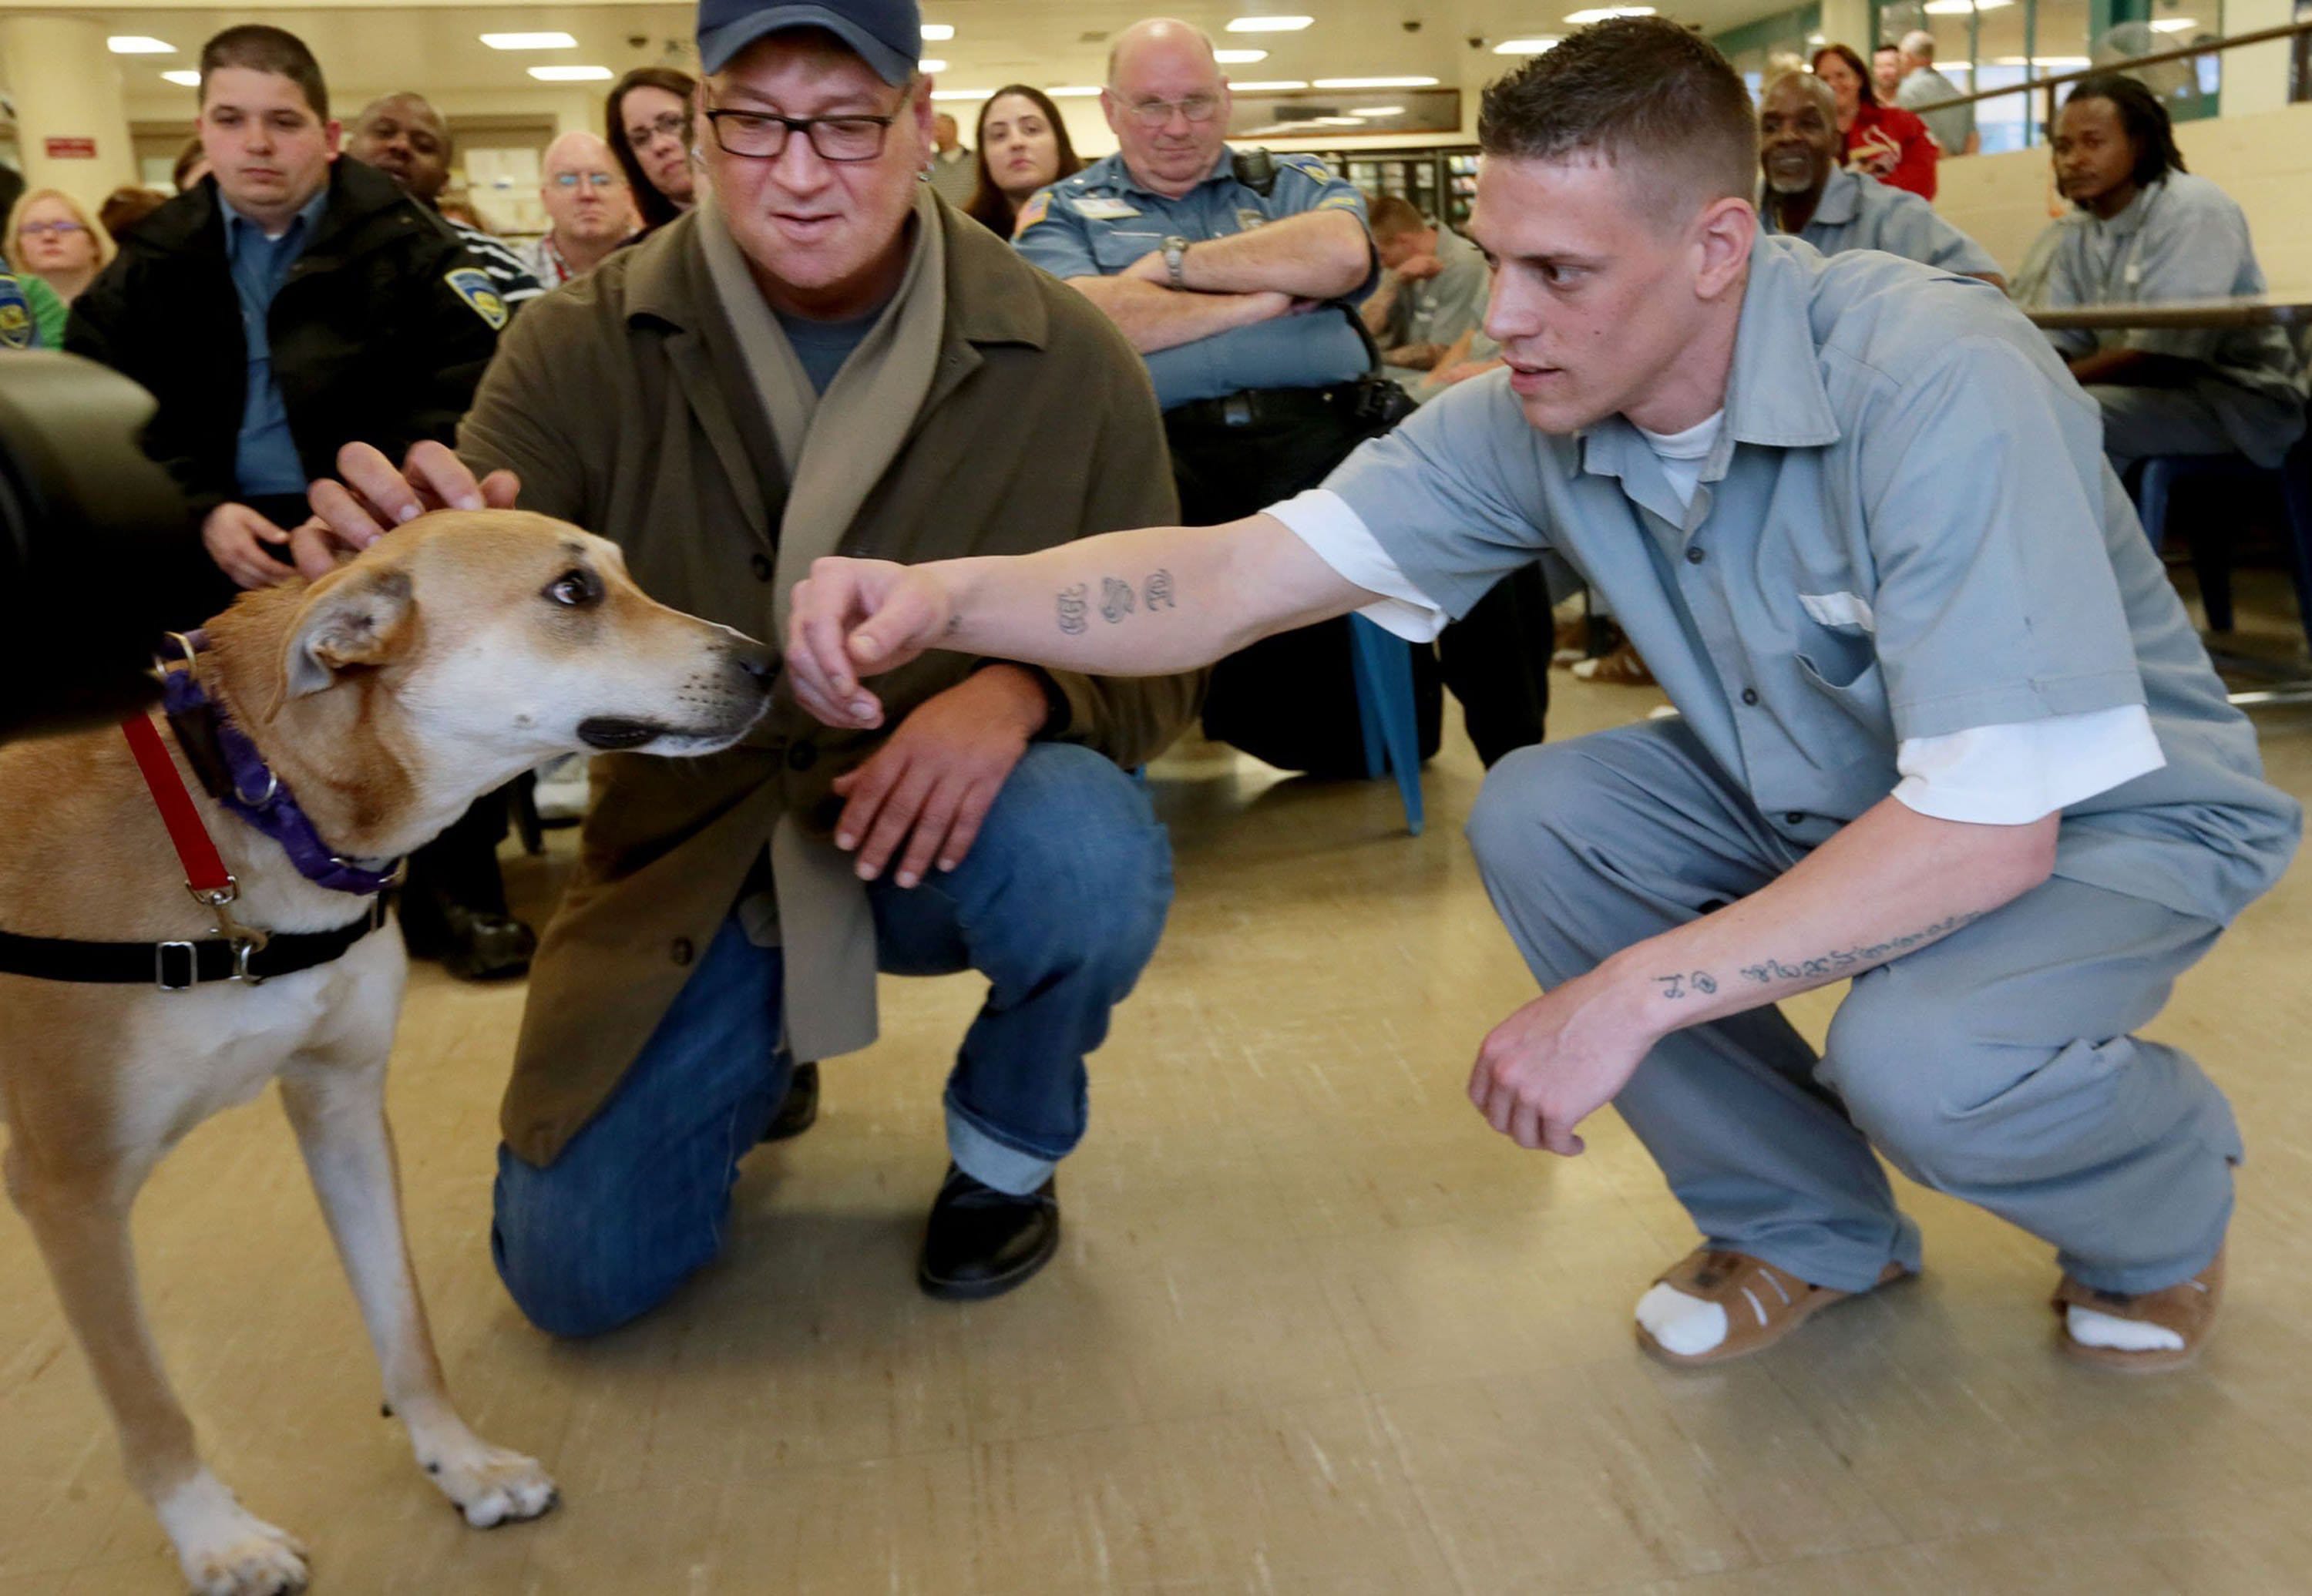 Randy Grim, left, introduces Burlesque to inmate Tony Ward as part of the Puppies for Parole program March 19 at the Missouri Eastern Correctional Center in Pacific, Mo.